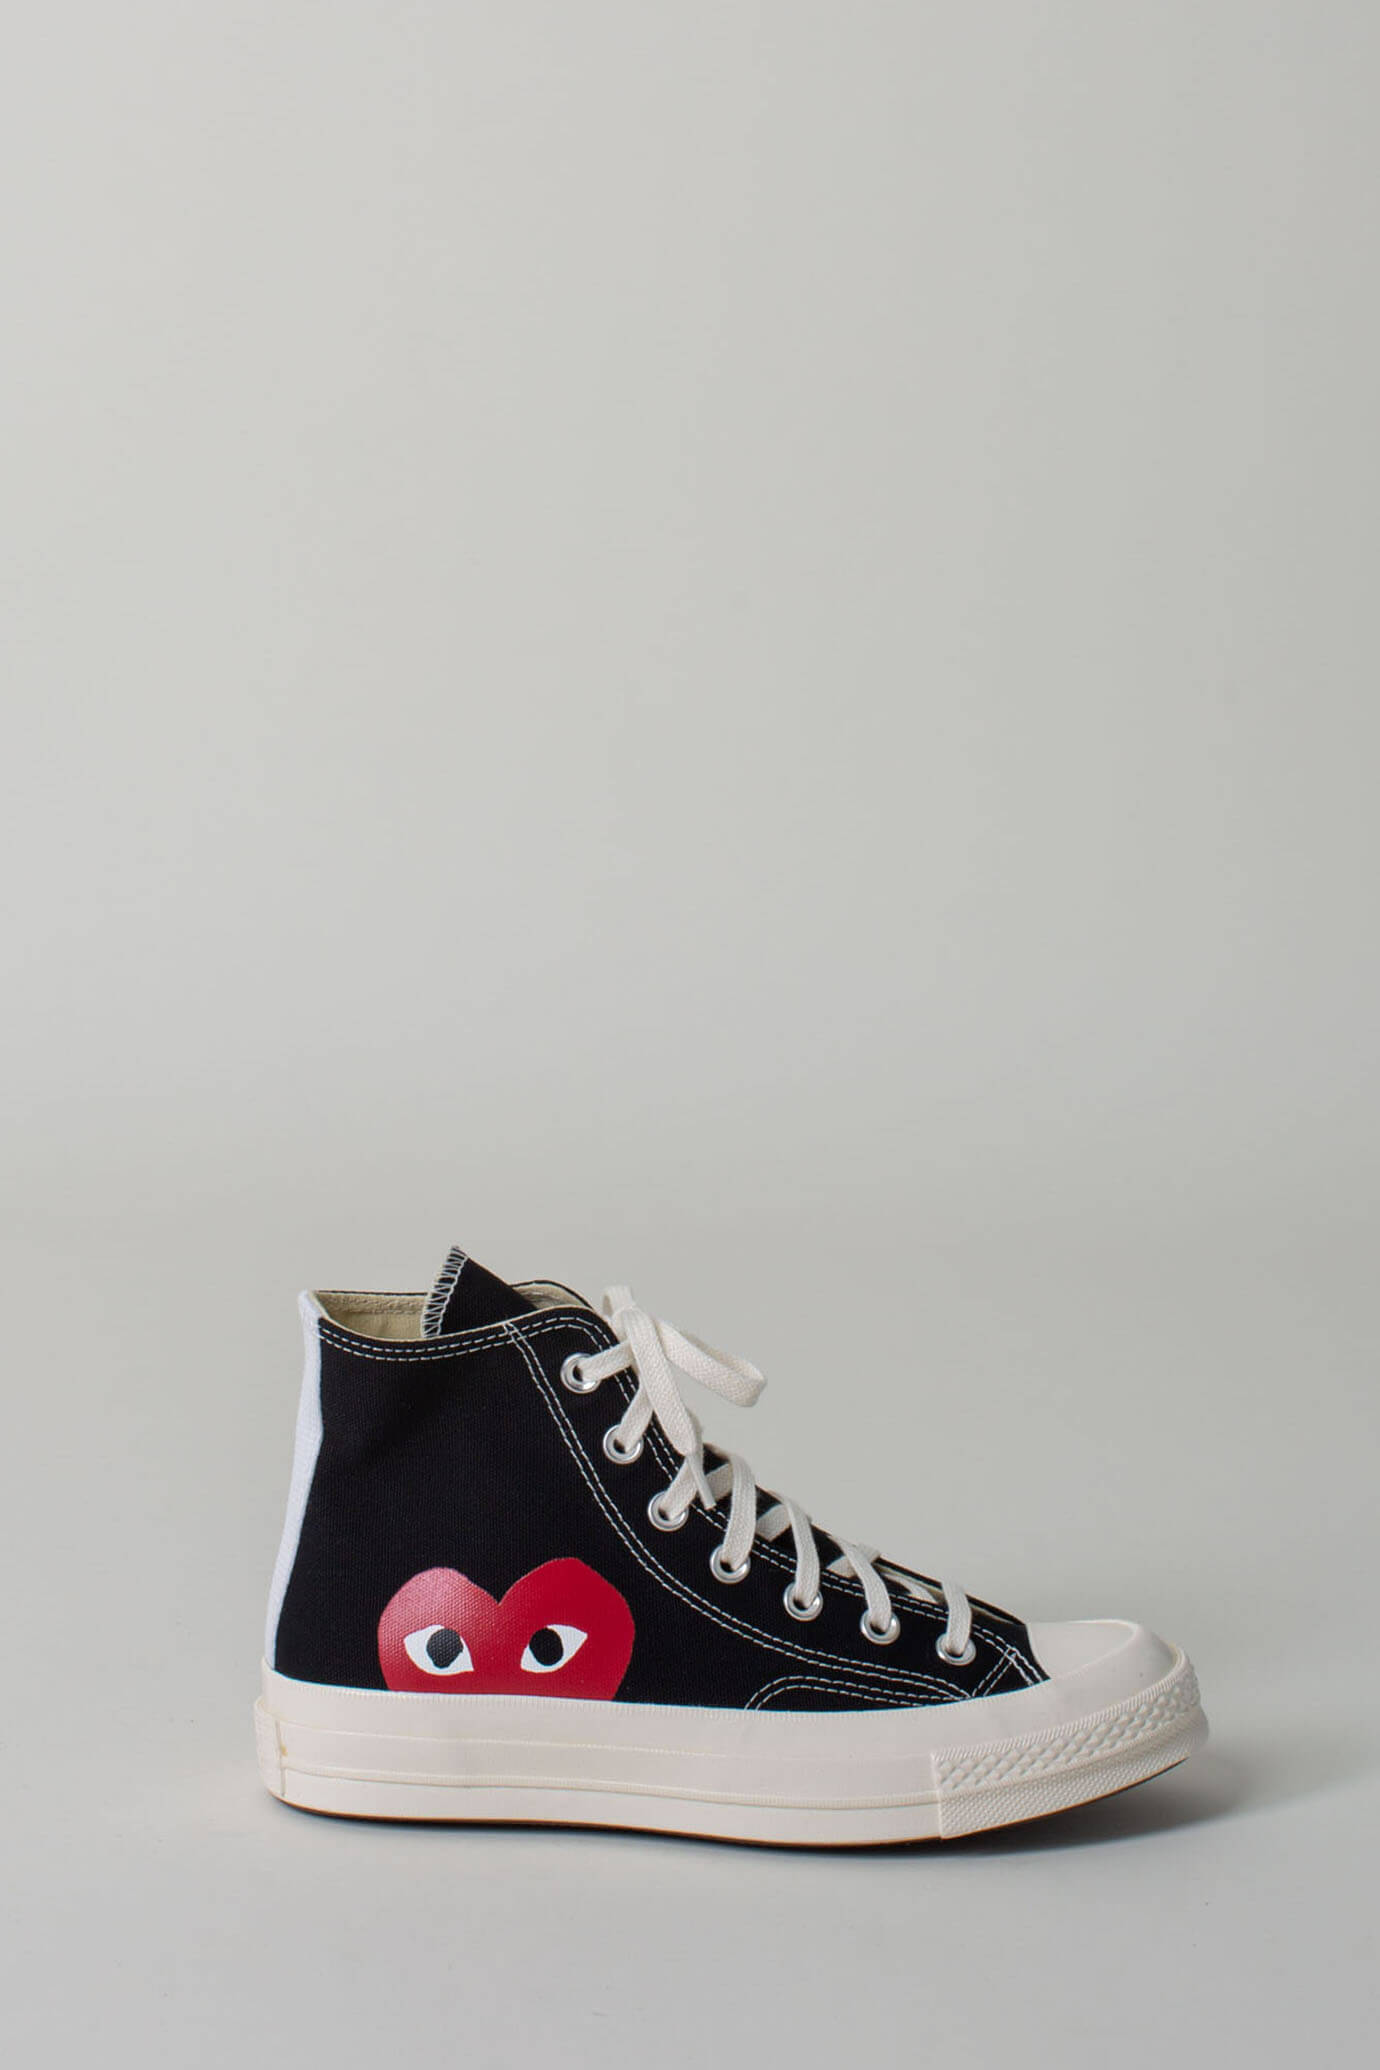 Converse CDG High – LABELS